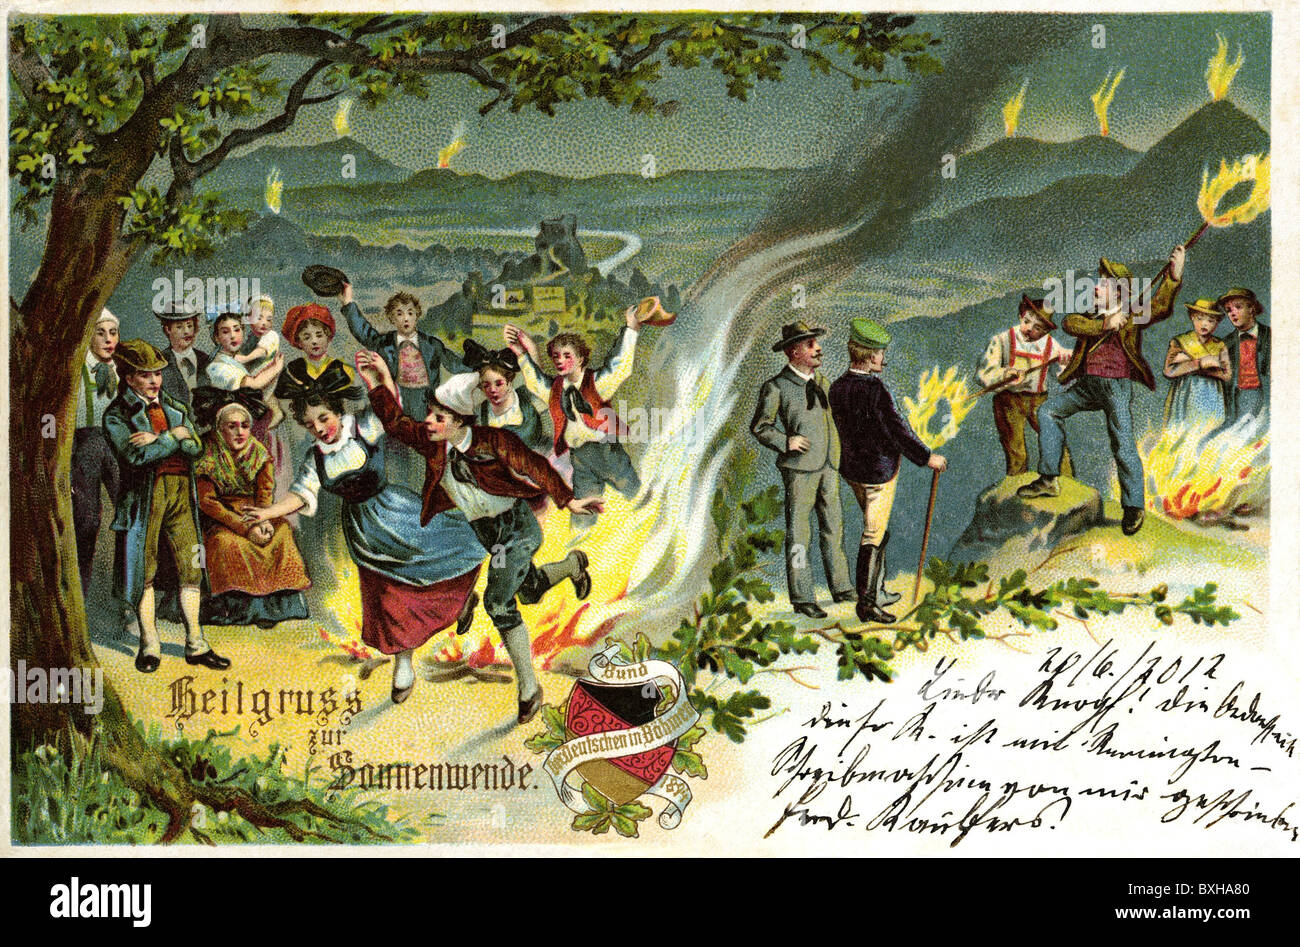 tradition / folklore, Austria, postcard, Midsummer Night greeting card, 1899, Additional-Rights-Clearences-Not Available Stock Photo